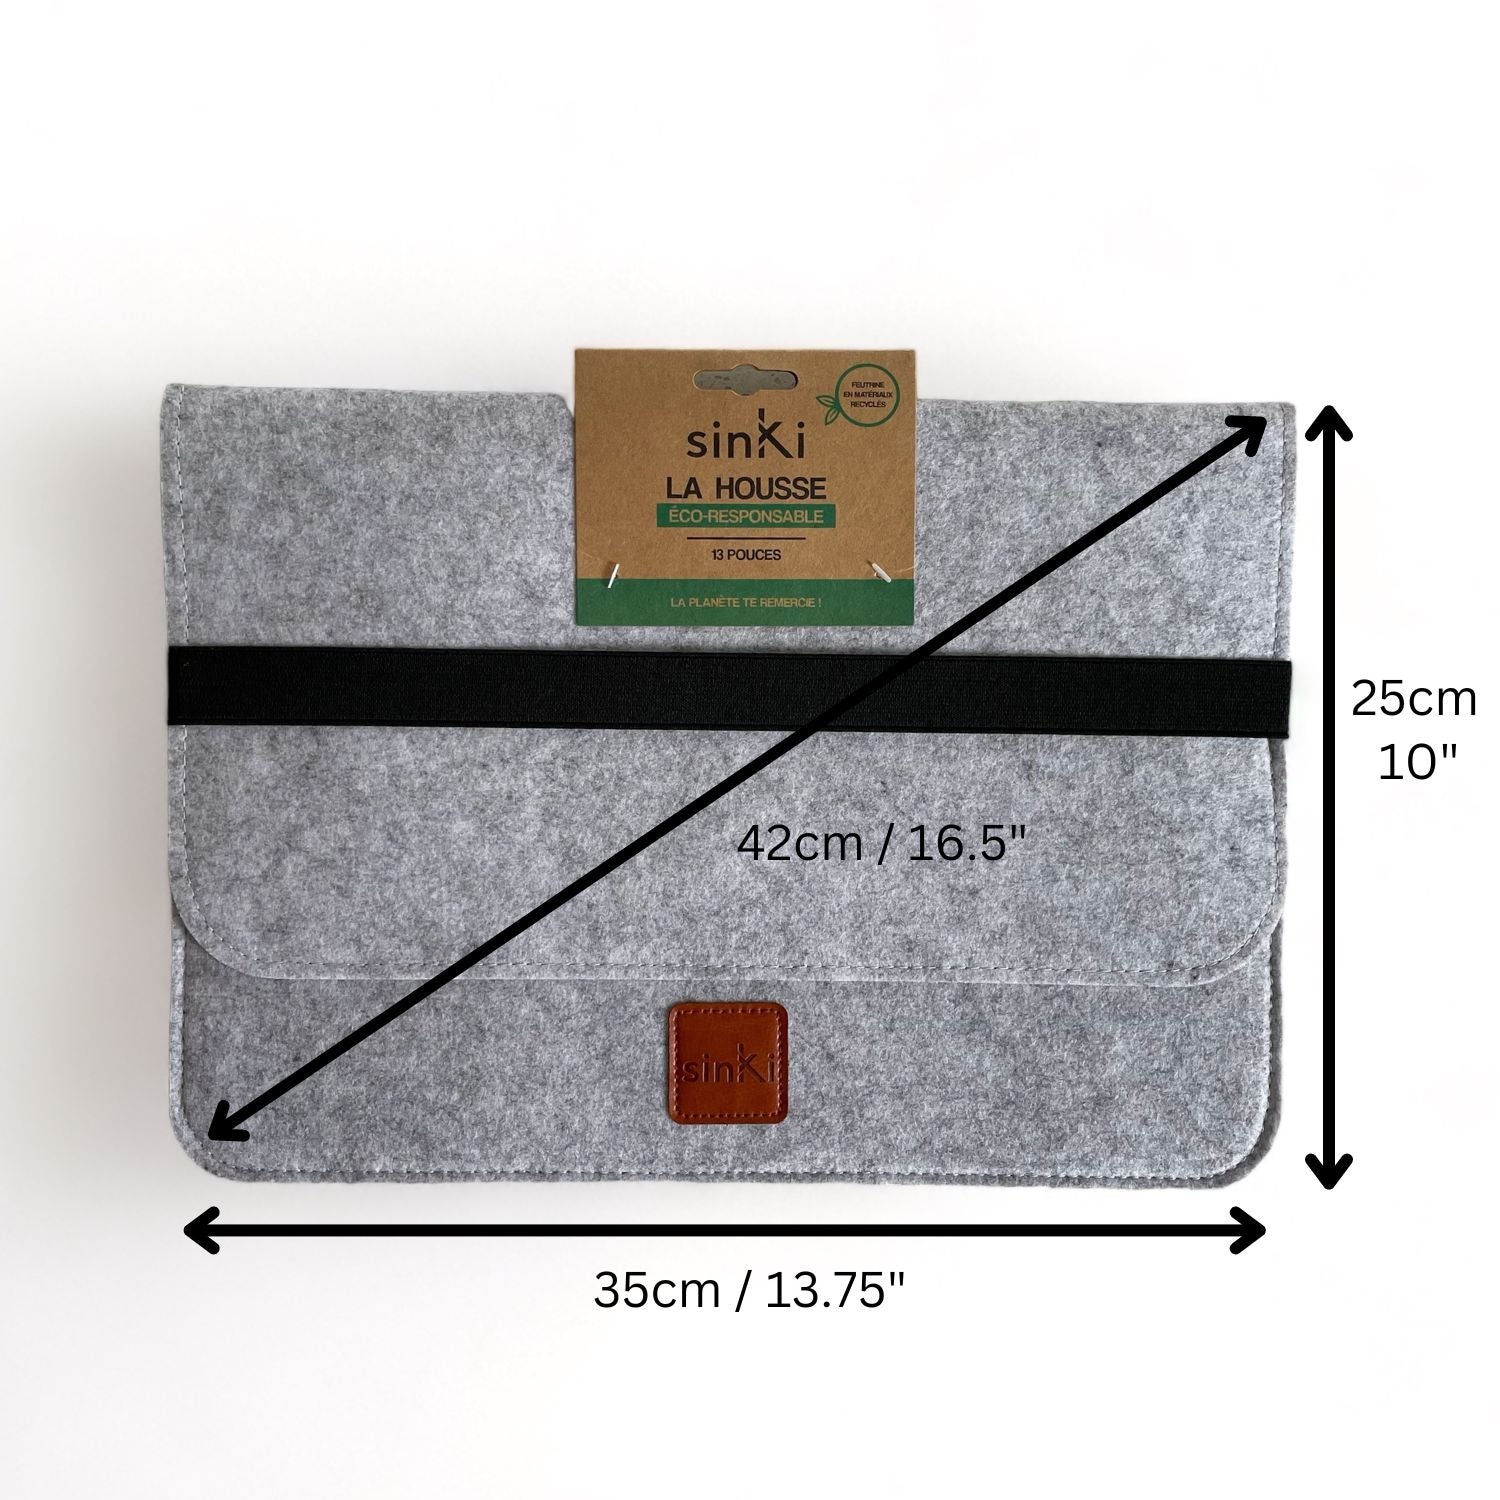 Dimensions of the light grey laptop sleeve